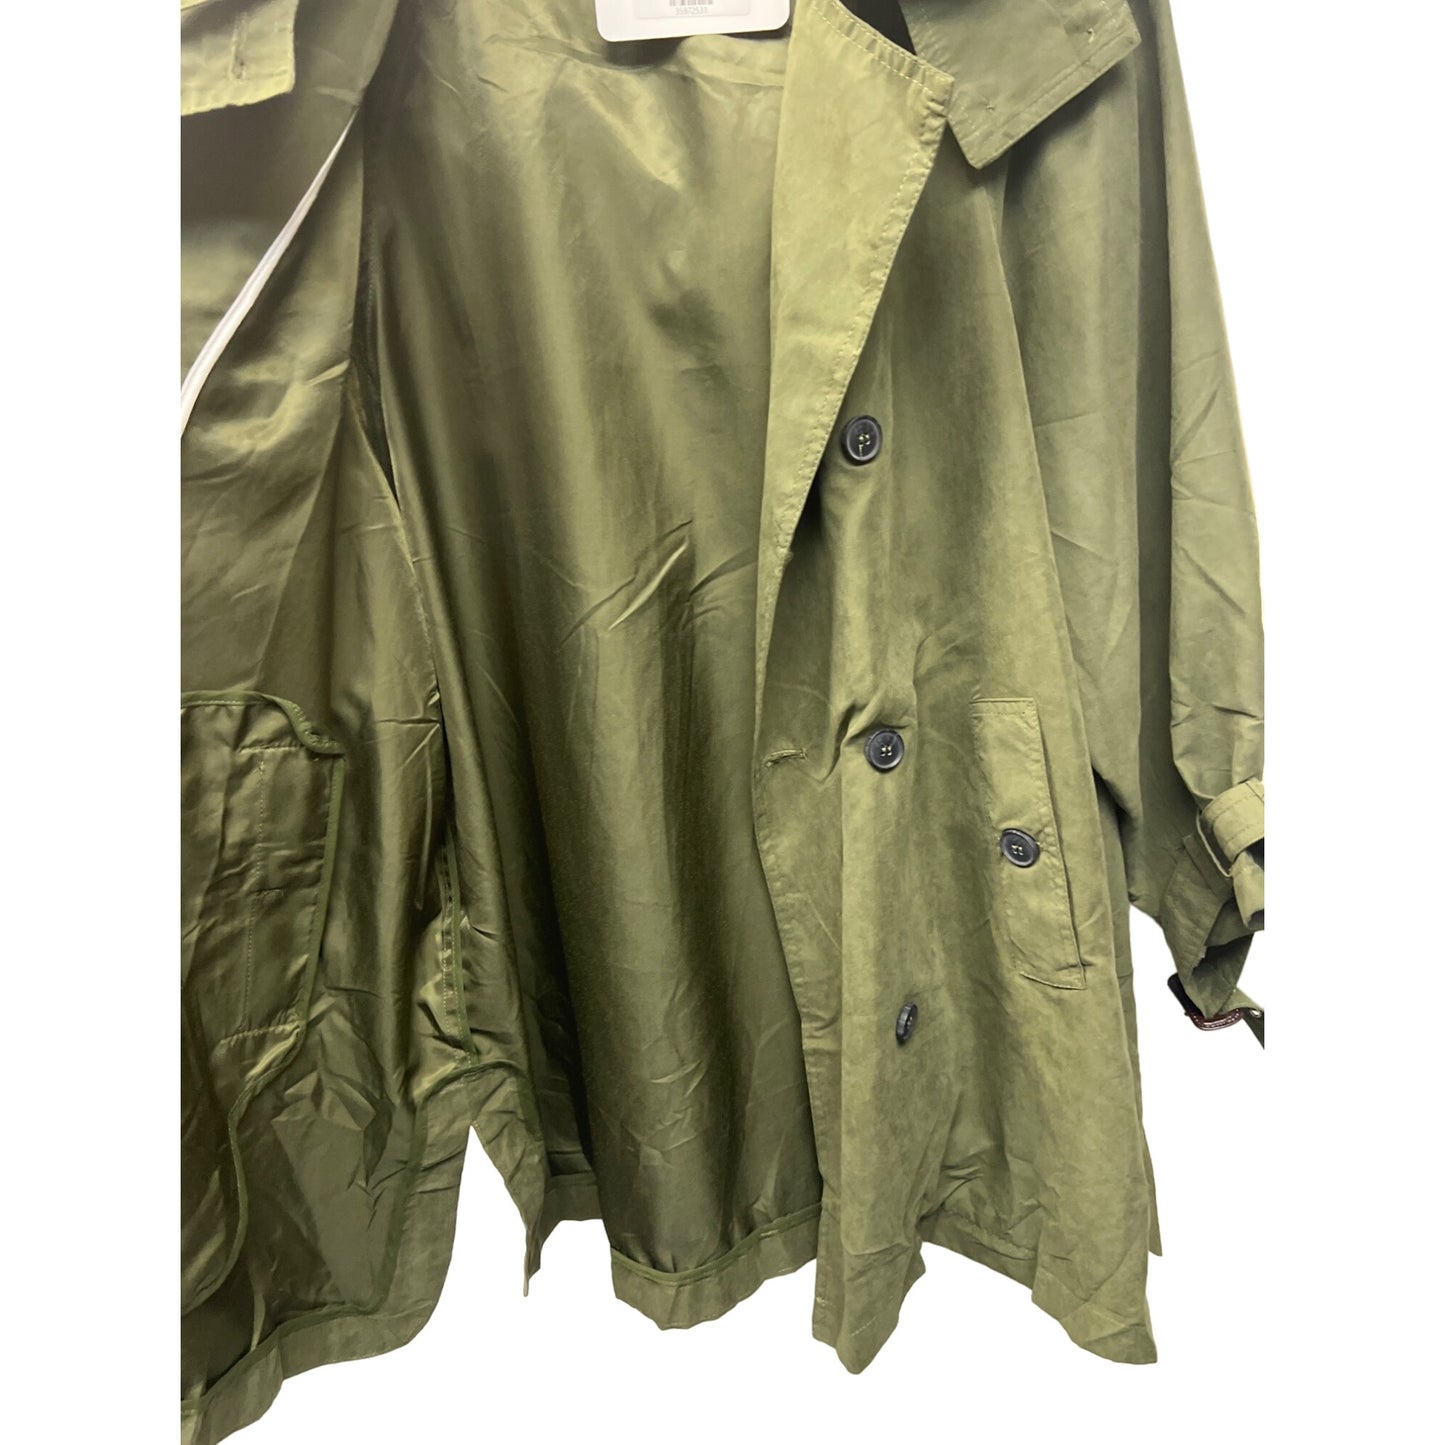 Umgee NWT Army Green Double Breasted Cargo Hoodie Jacket